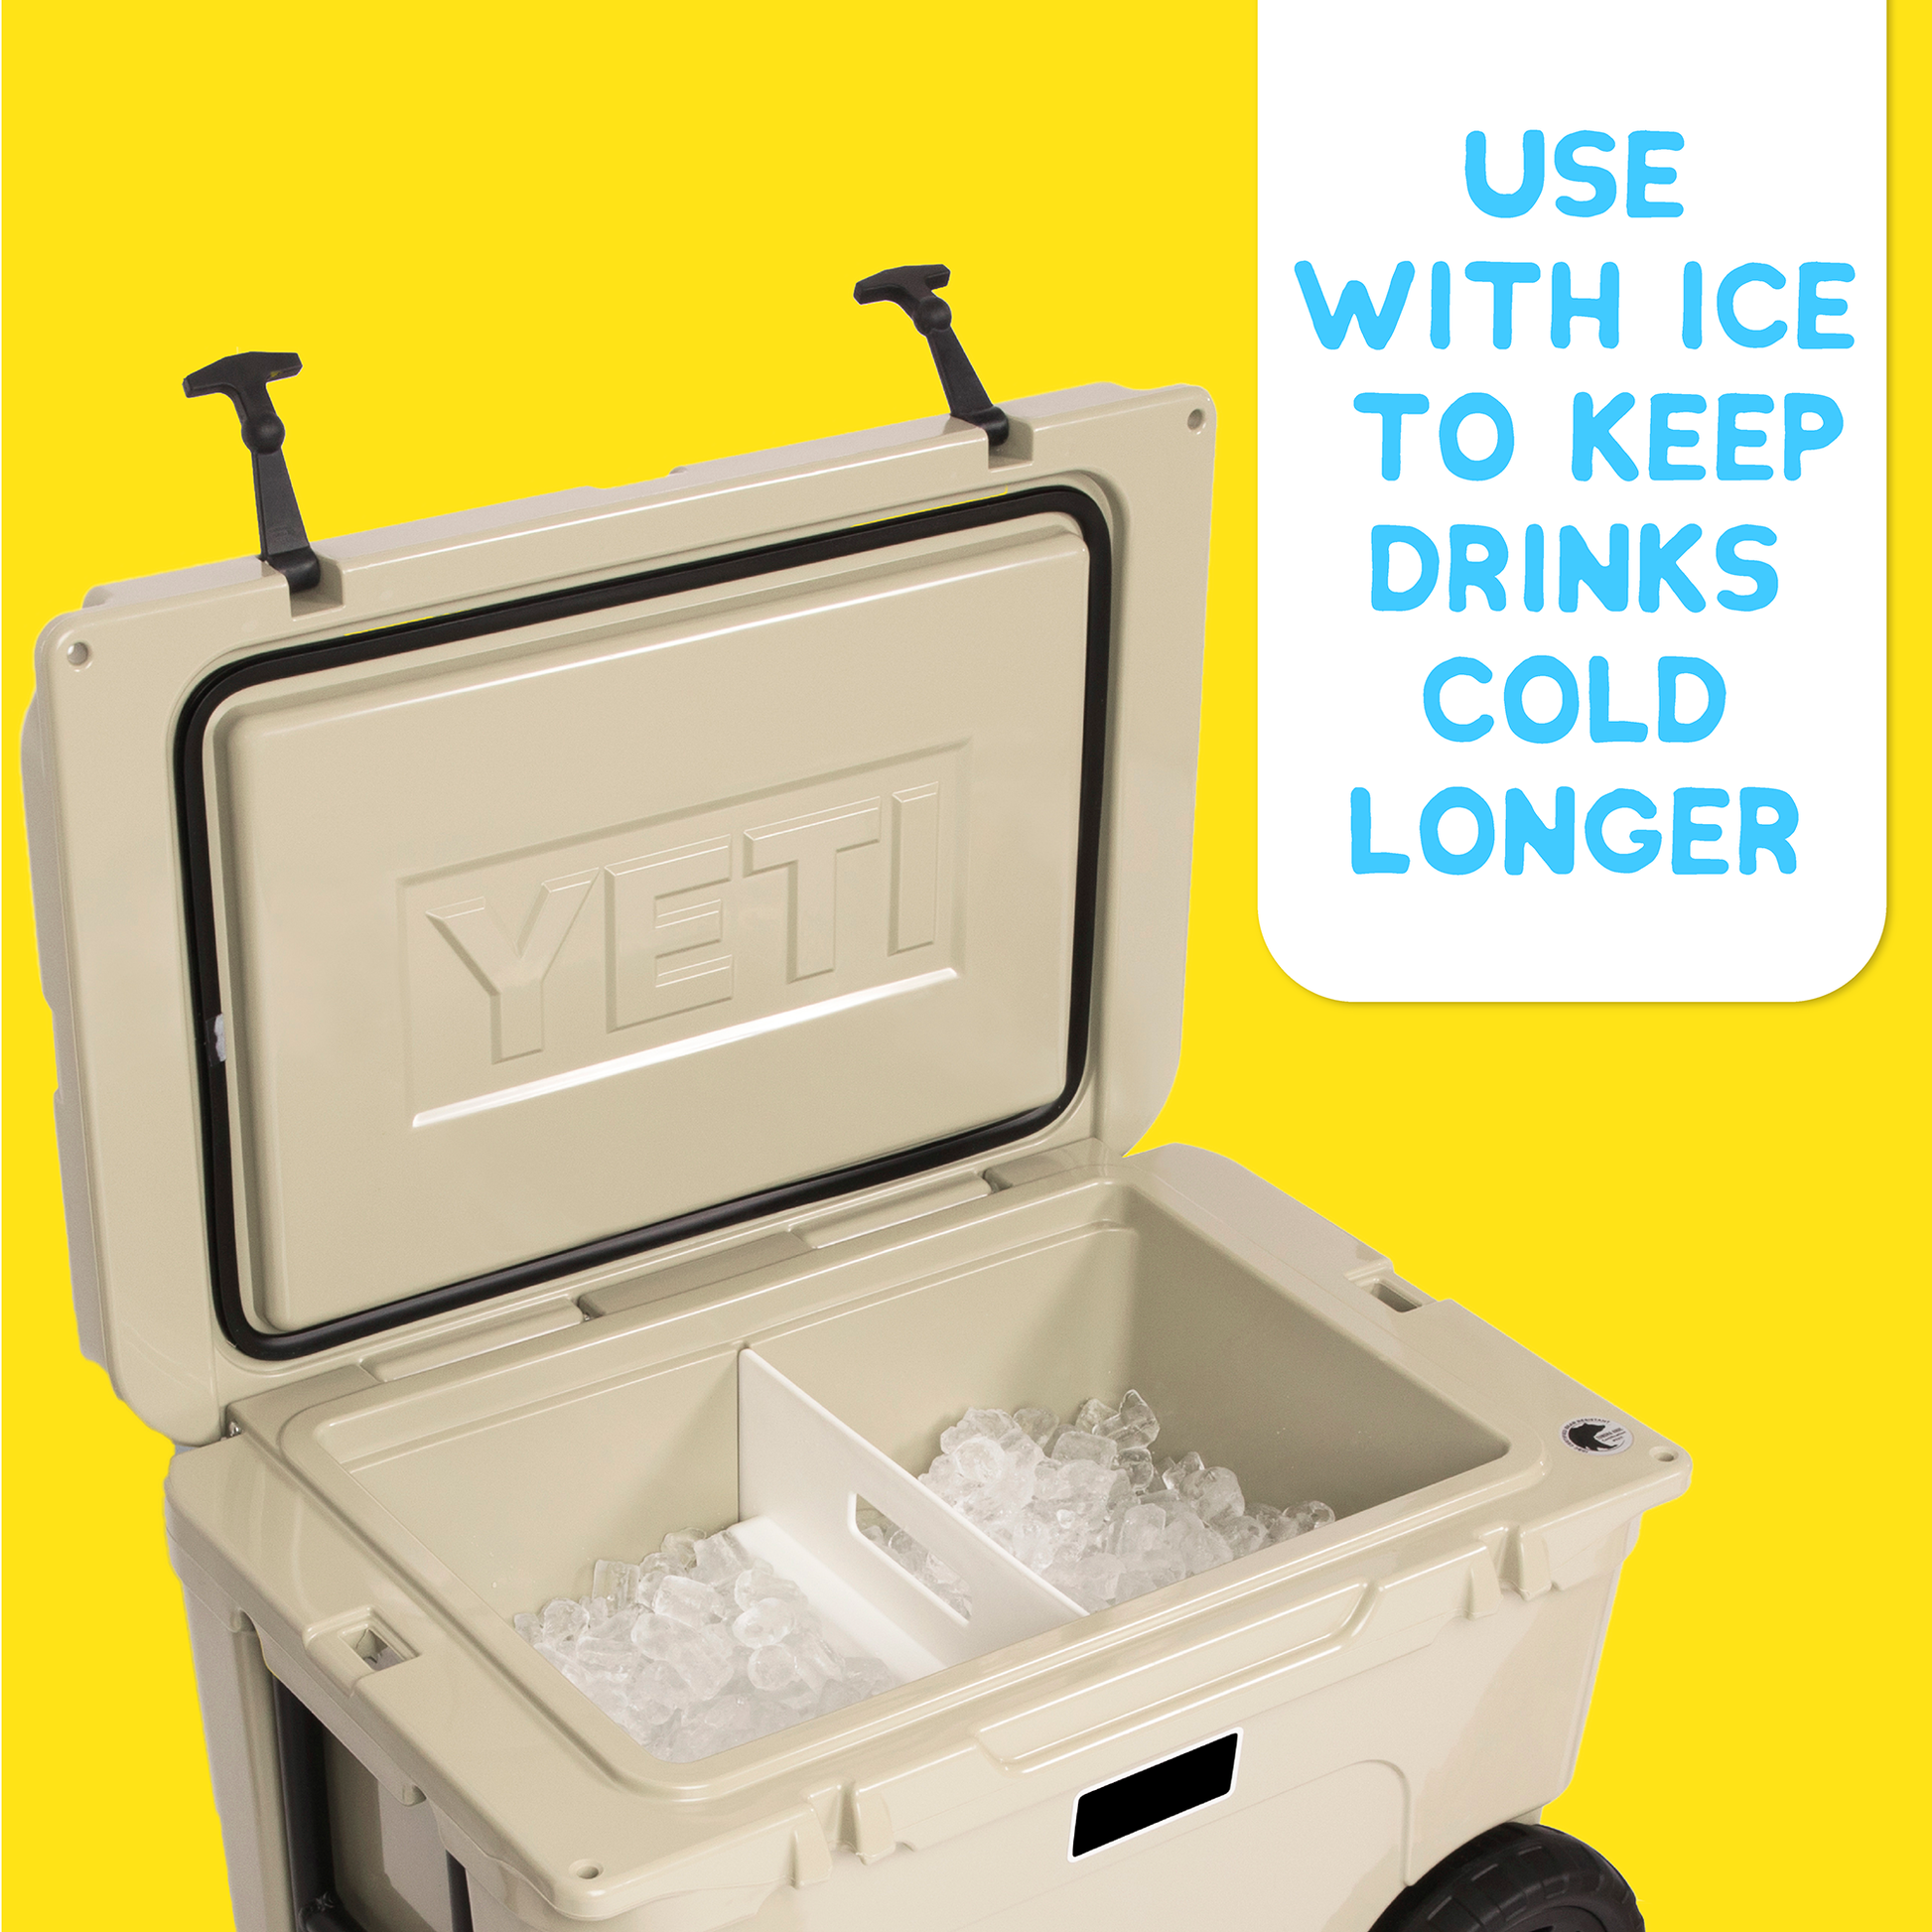 Yeti Ice Pack keeps drinks cool all day